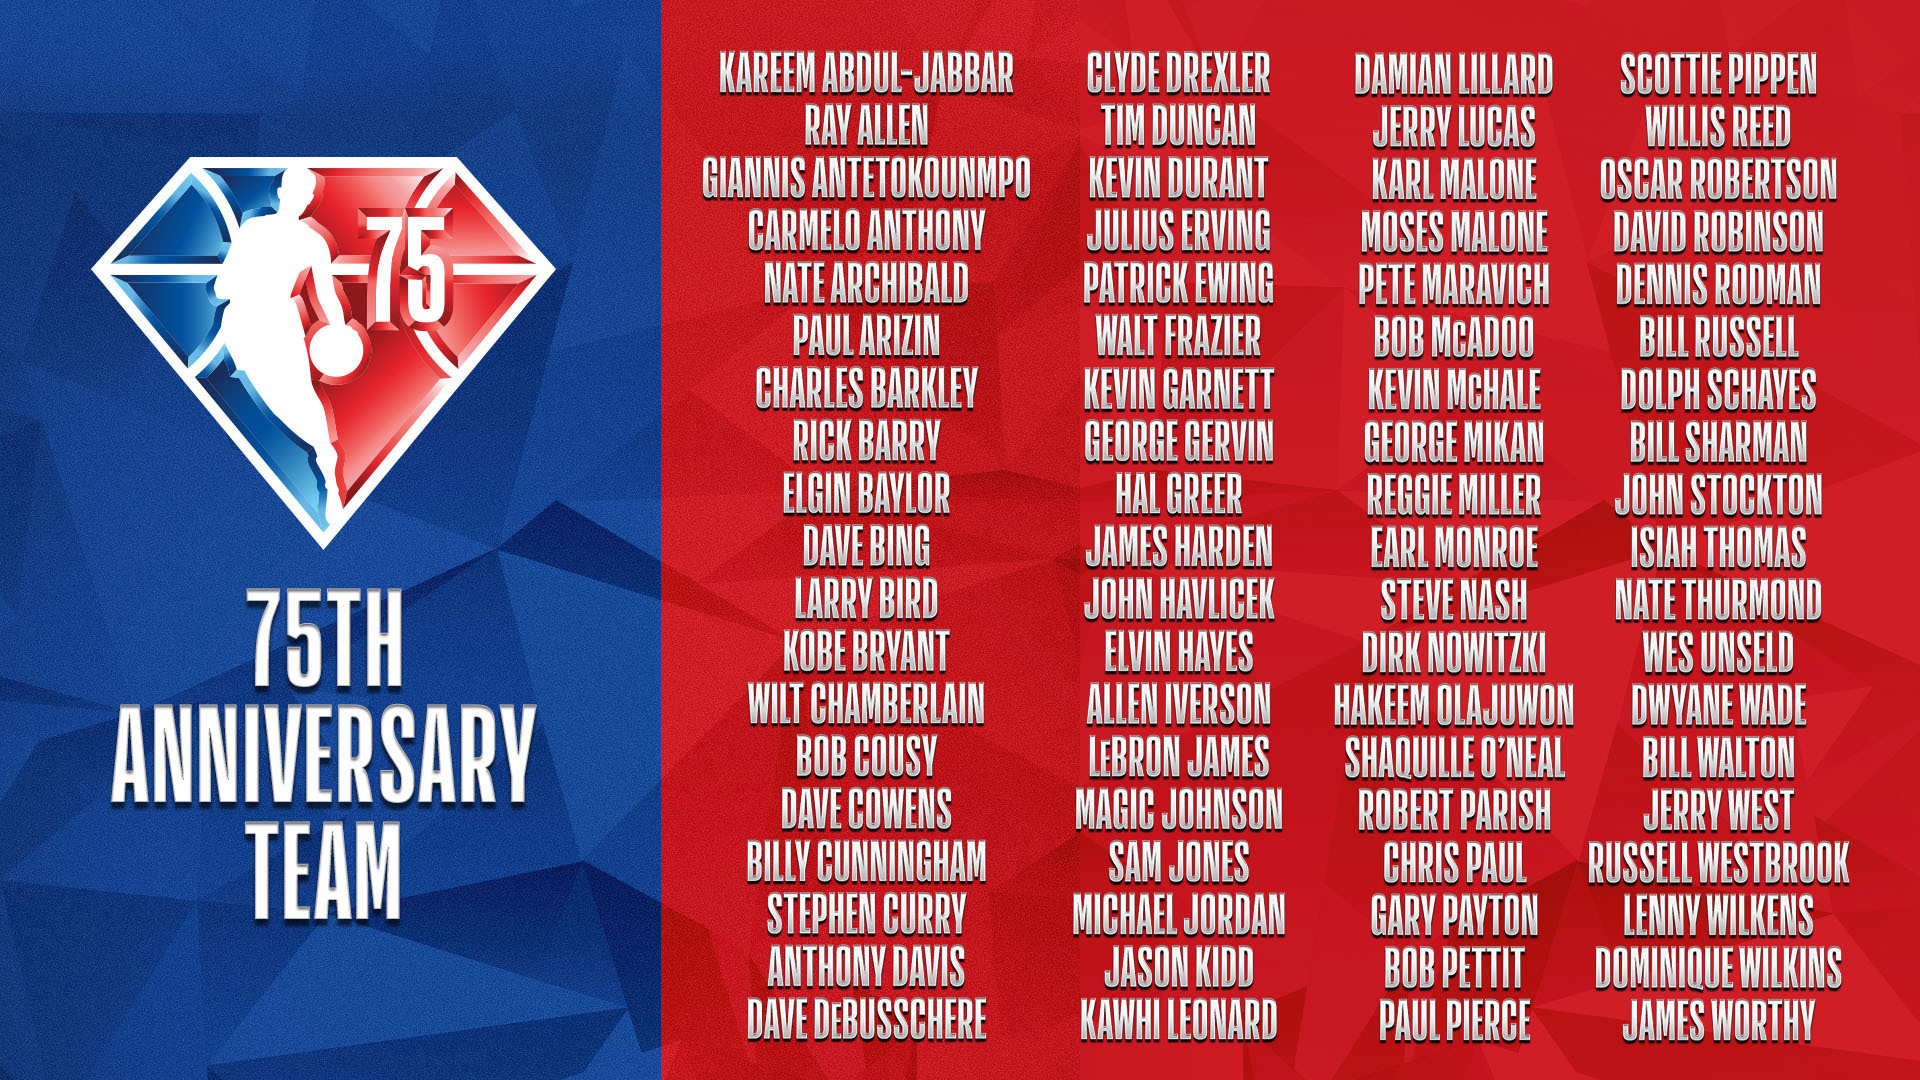 Wonderful tribute to the NBA 75th Anniversary Team at the All-Star Game  2022